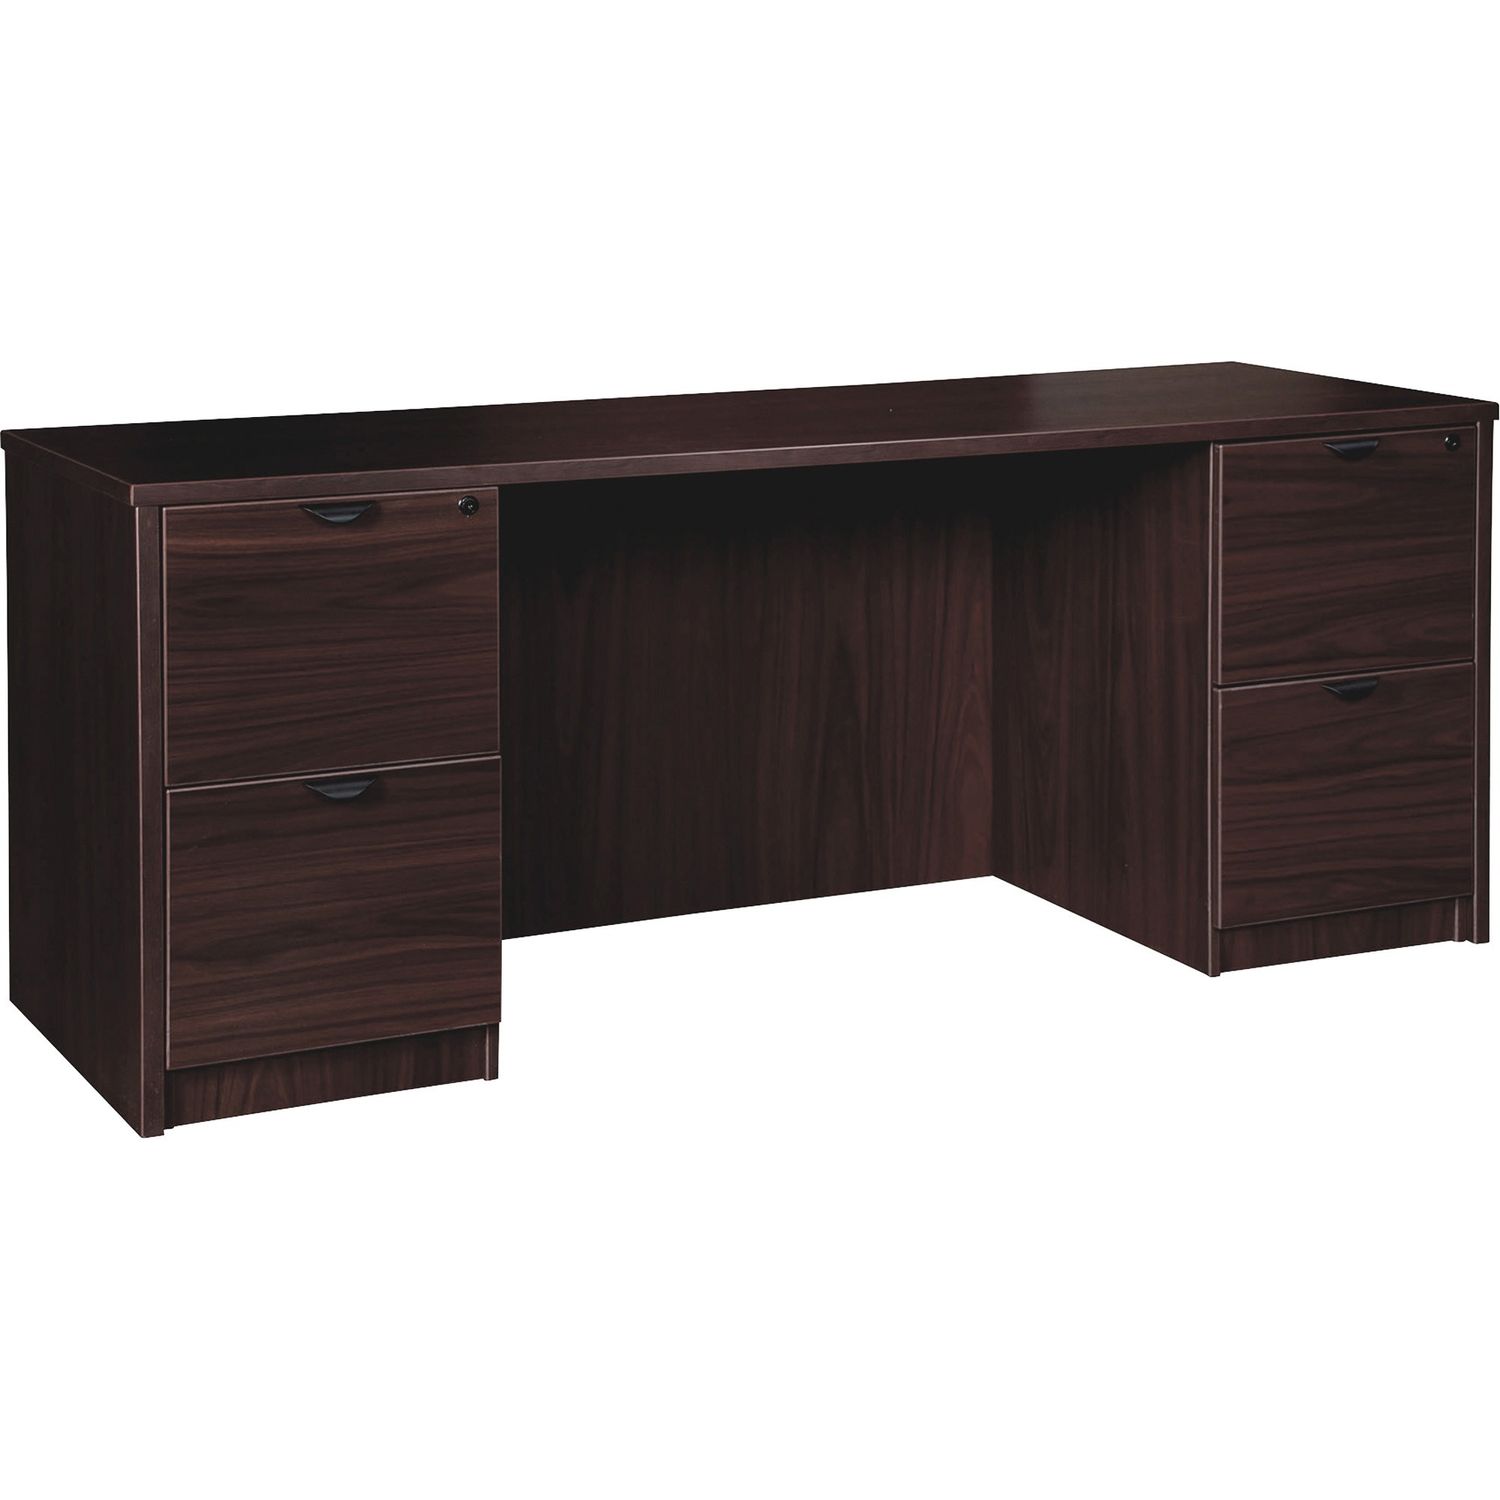 Prominence 2.0 Espresso Laminate Double-Pedestal Credenza - 2-Drawer 66" x 24" x 29" , 1" Top, 2 x File Drawer(s), Double Pedestal on Left/Right Side, Band Edge, Material: Particleboard